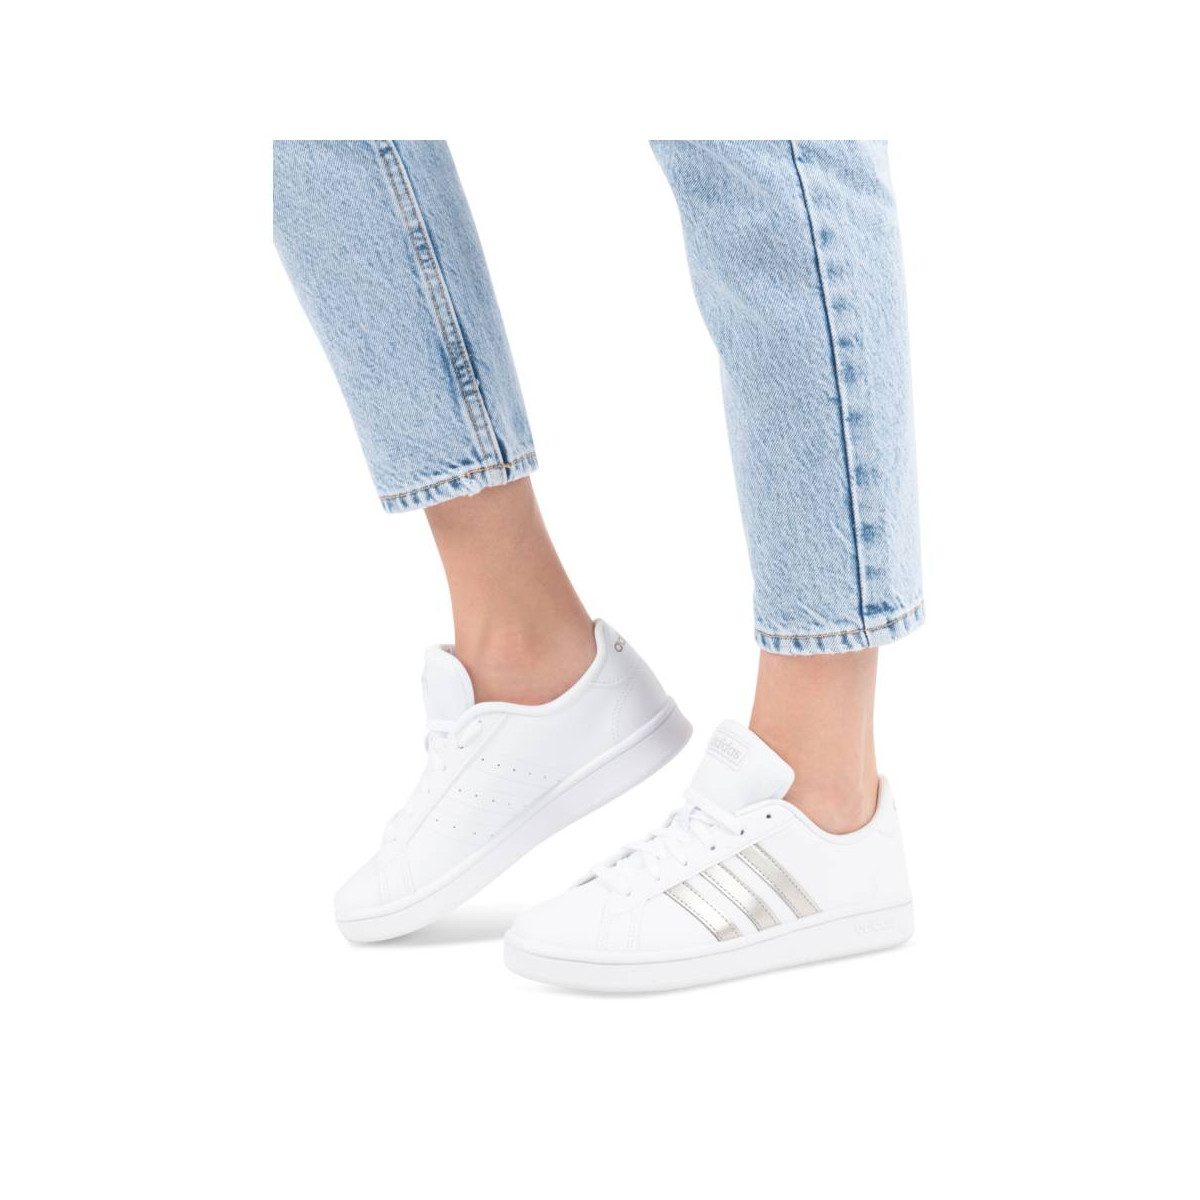 https://www.chaussea.com/be/191067-thickbox_default/baskets-blanches-adidas-grand-court.jpg